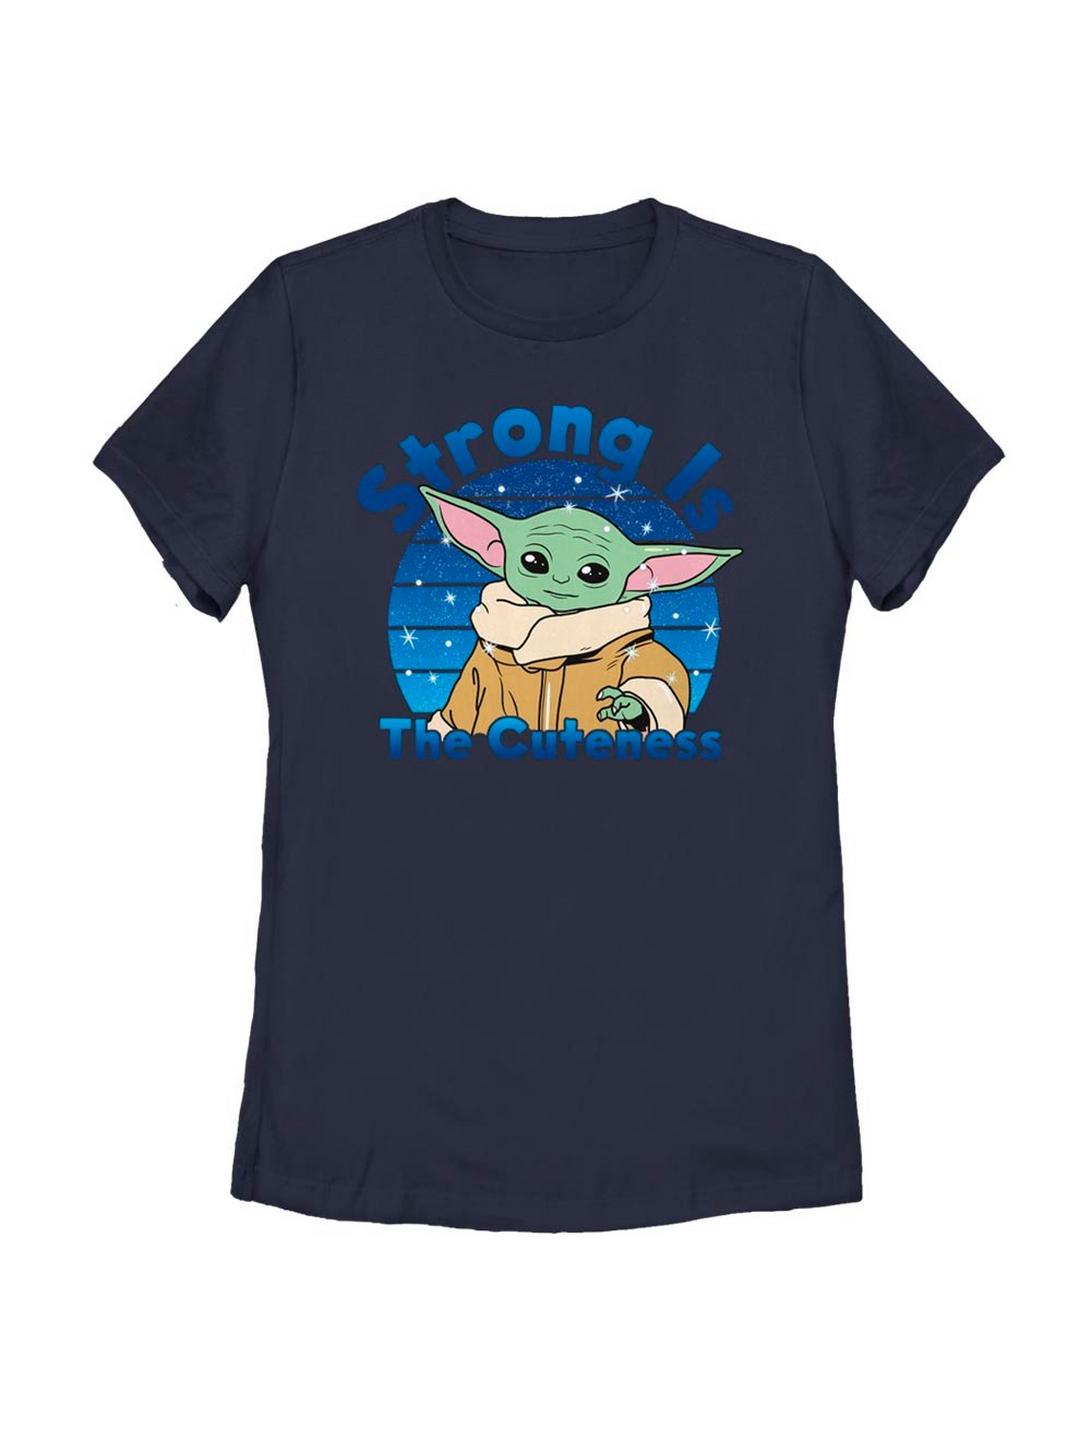 Star Wars The Mandalorian The Child Strong Is The Cuteness Womens T-Shirt, NAVY, hi-res